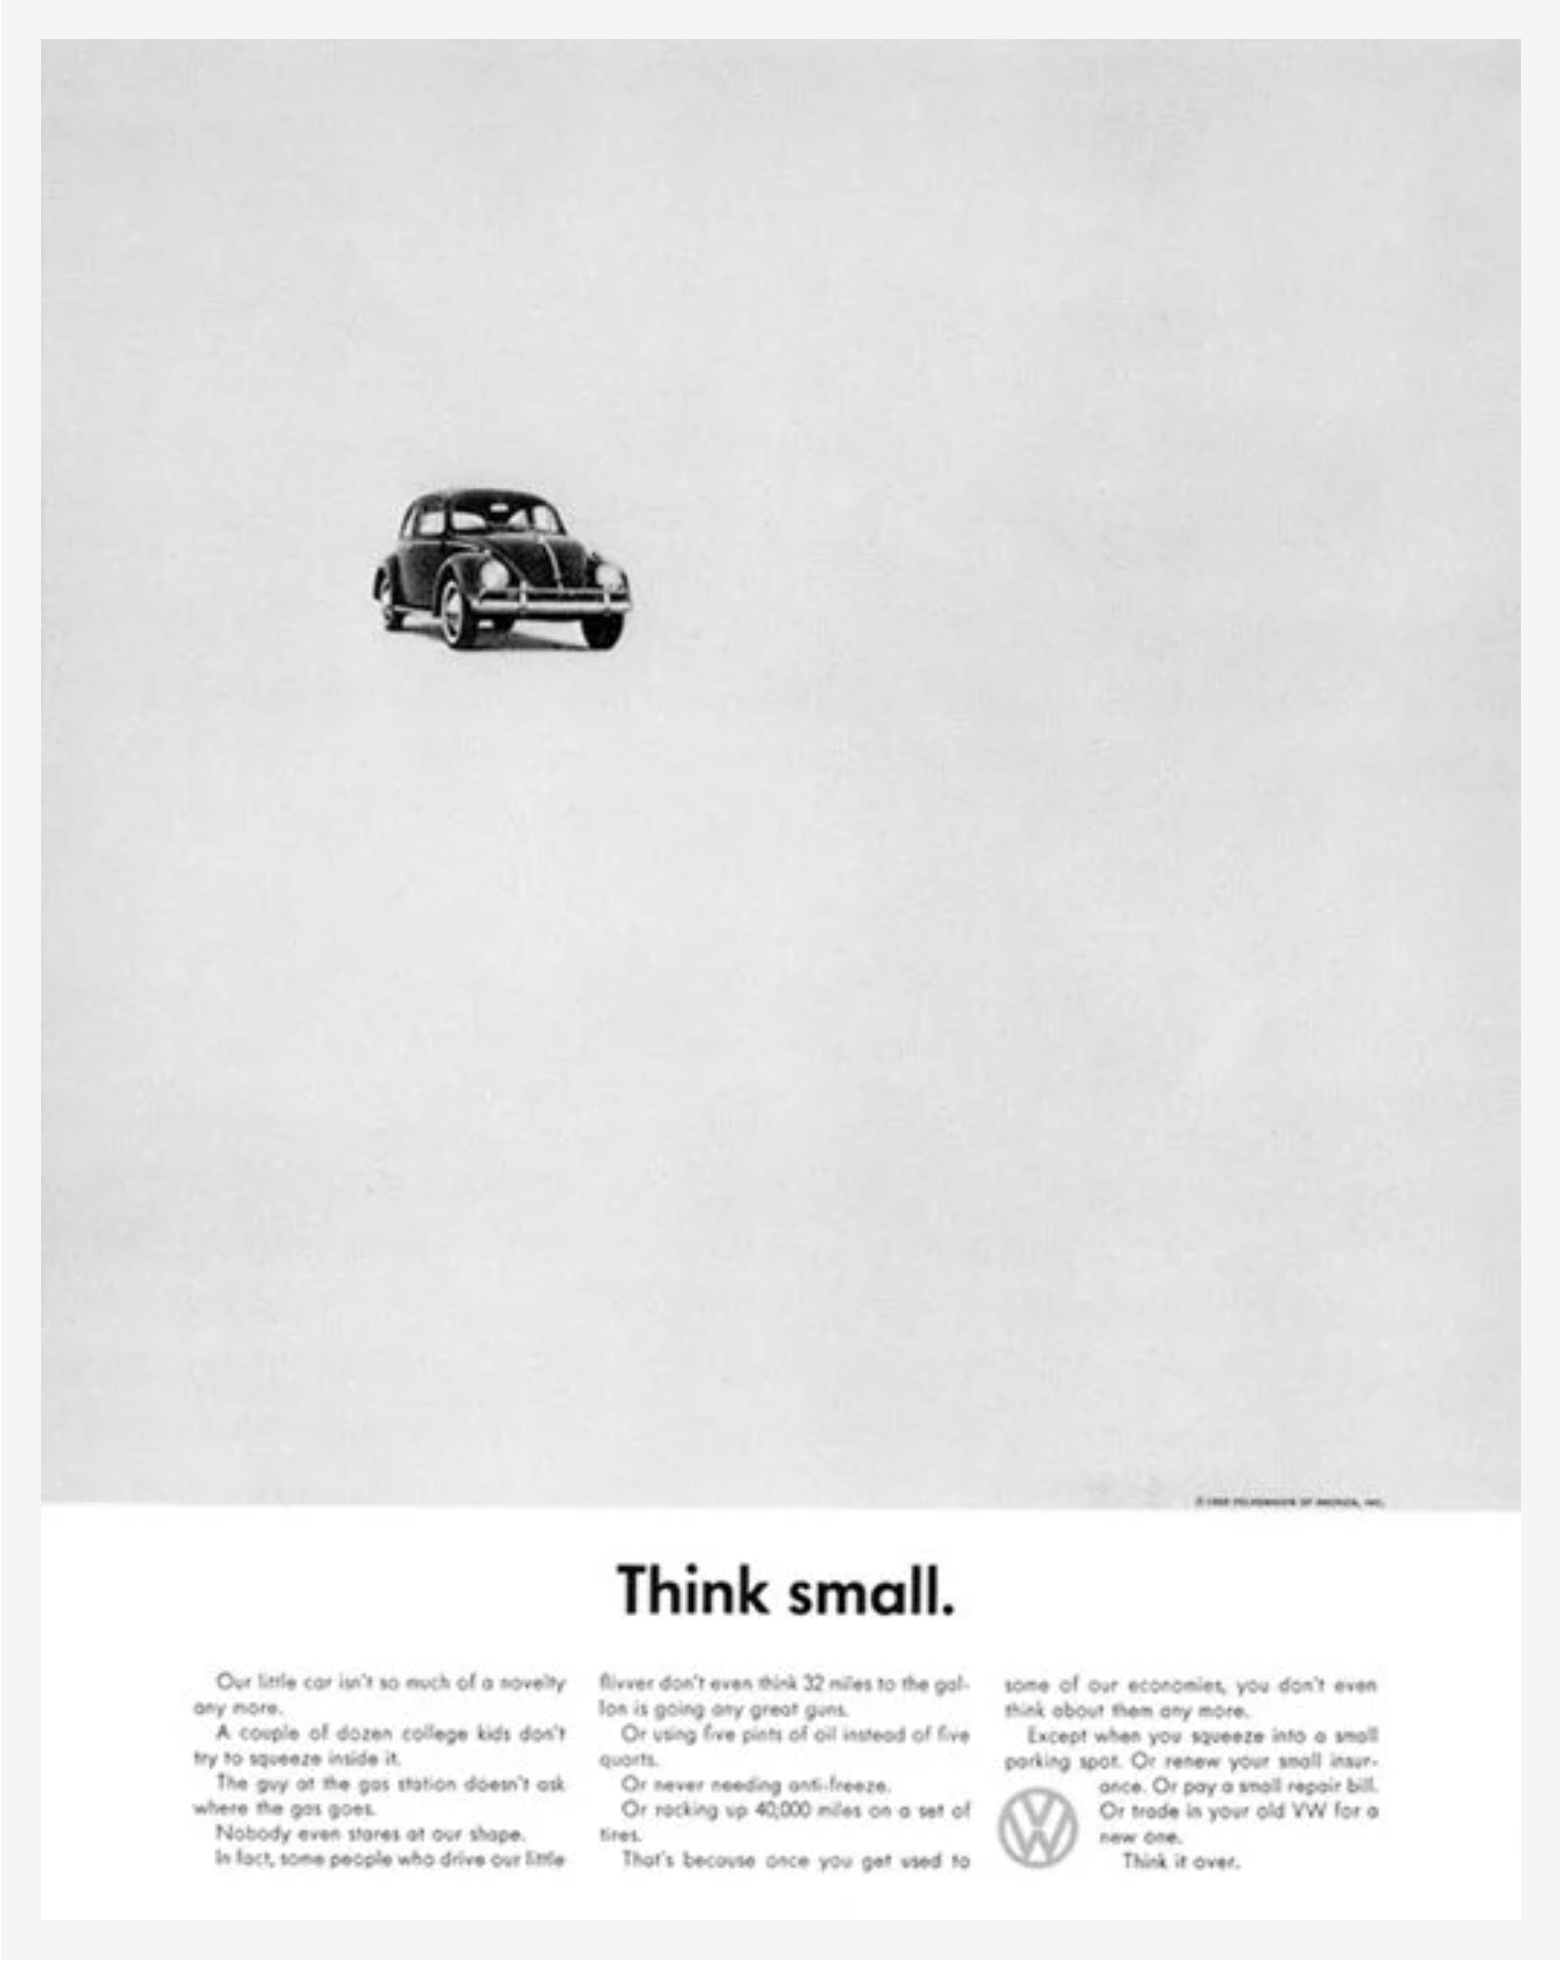 A black and white photo of a VW Beetle The headline reads "Think Small." The body text starts with "Our little car isn't so much of a novelty anymore..."